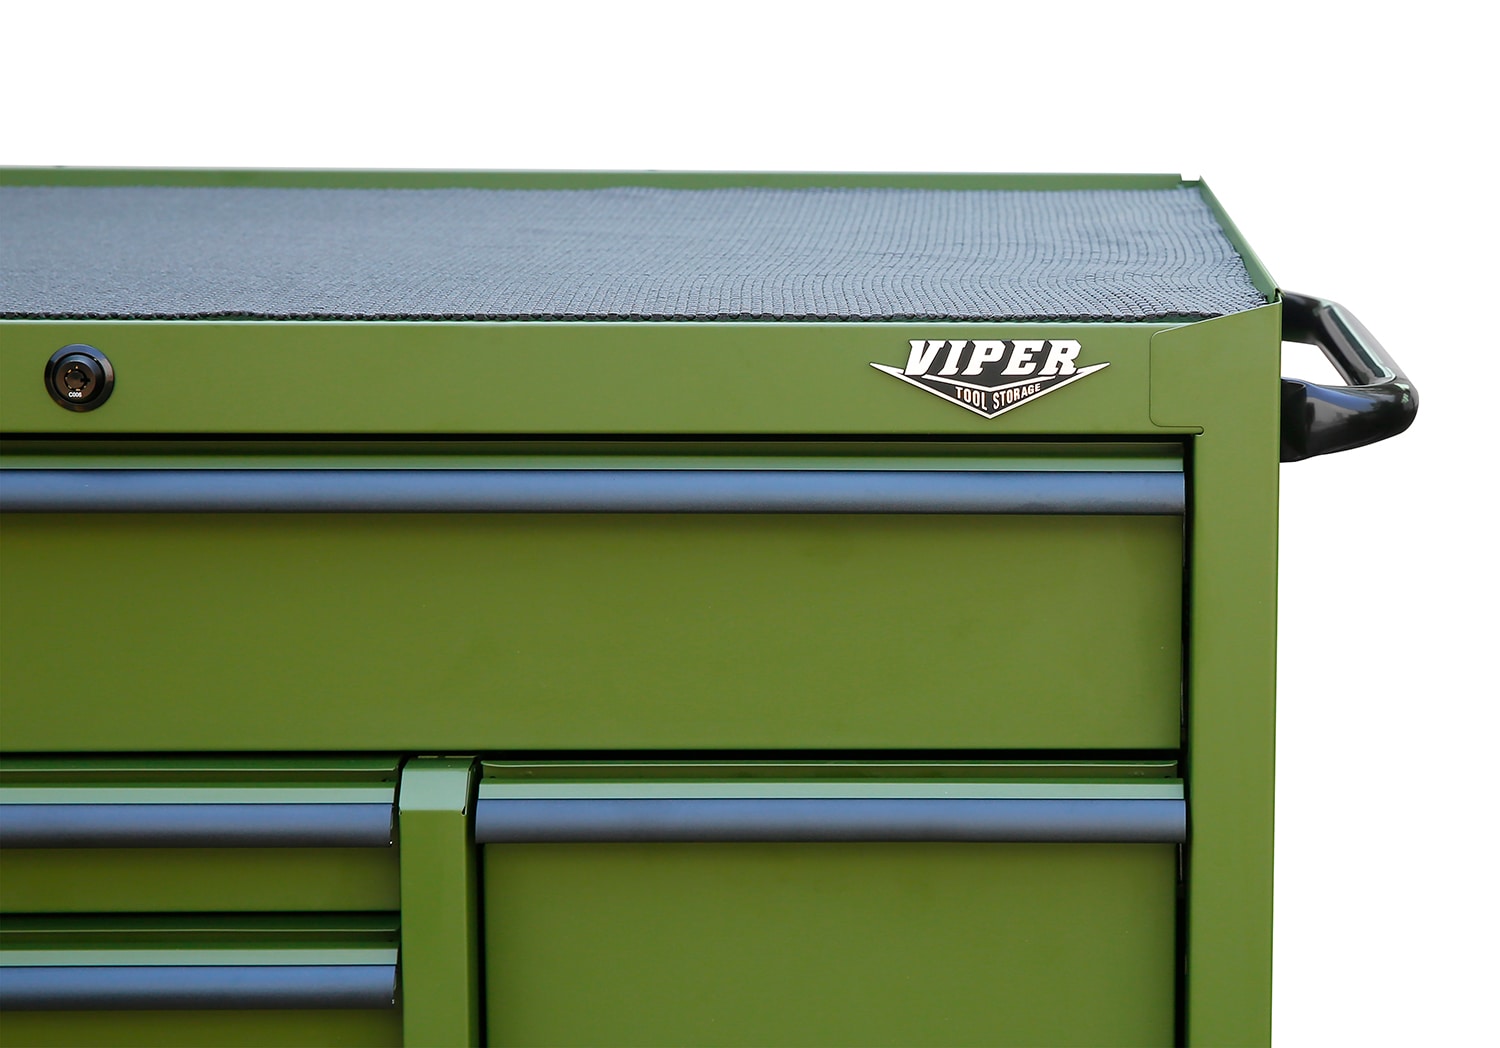 Toolboxes Results - VIPER TOOL STORAGE